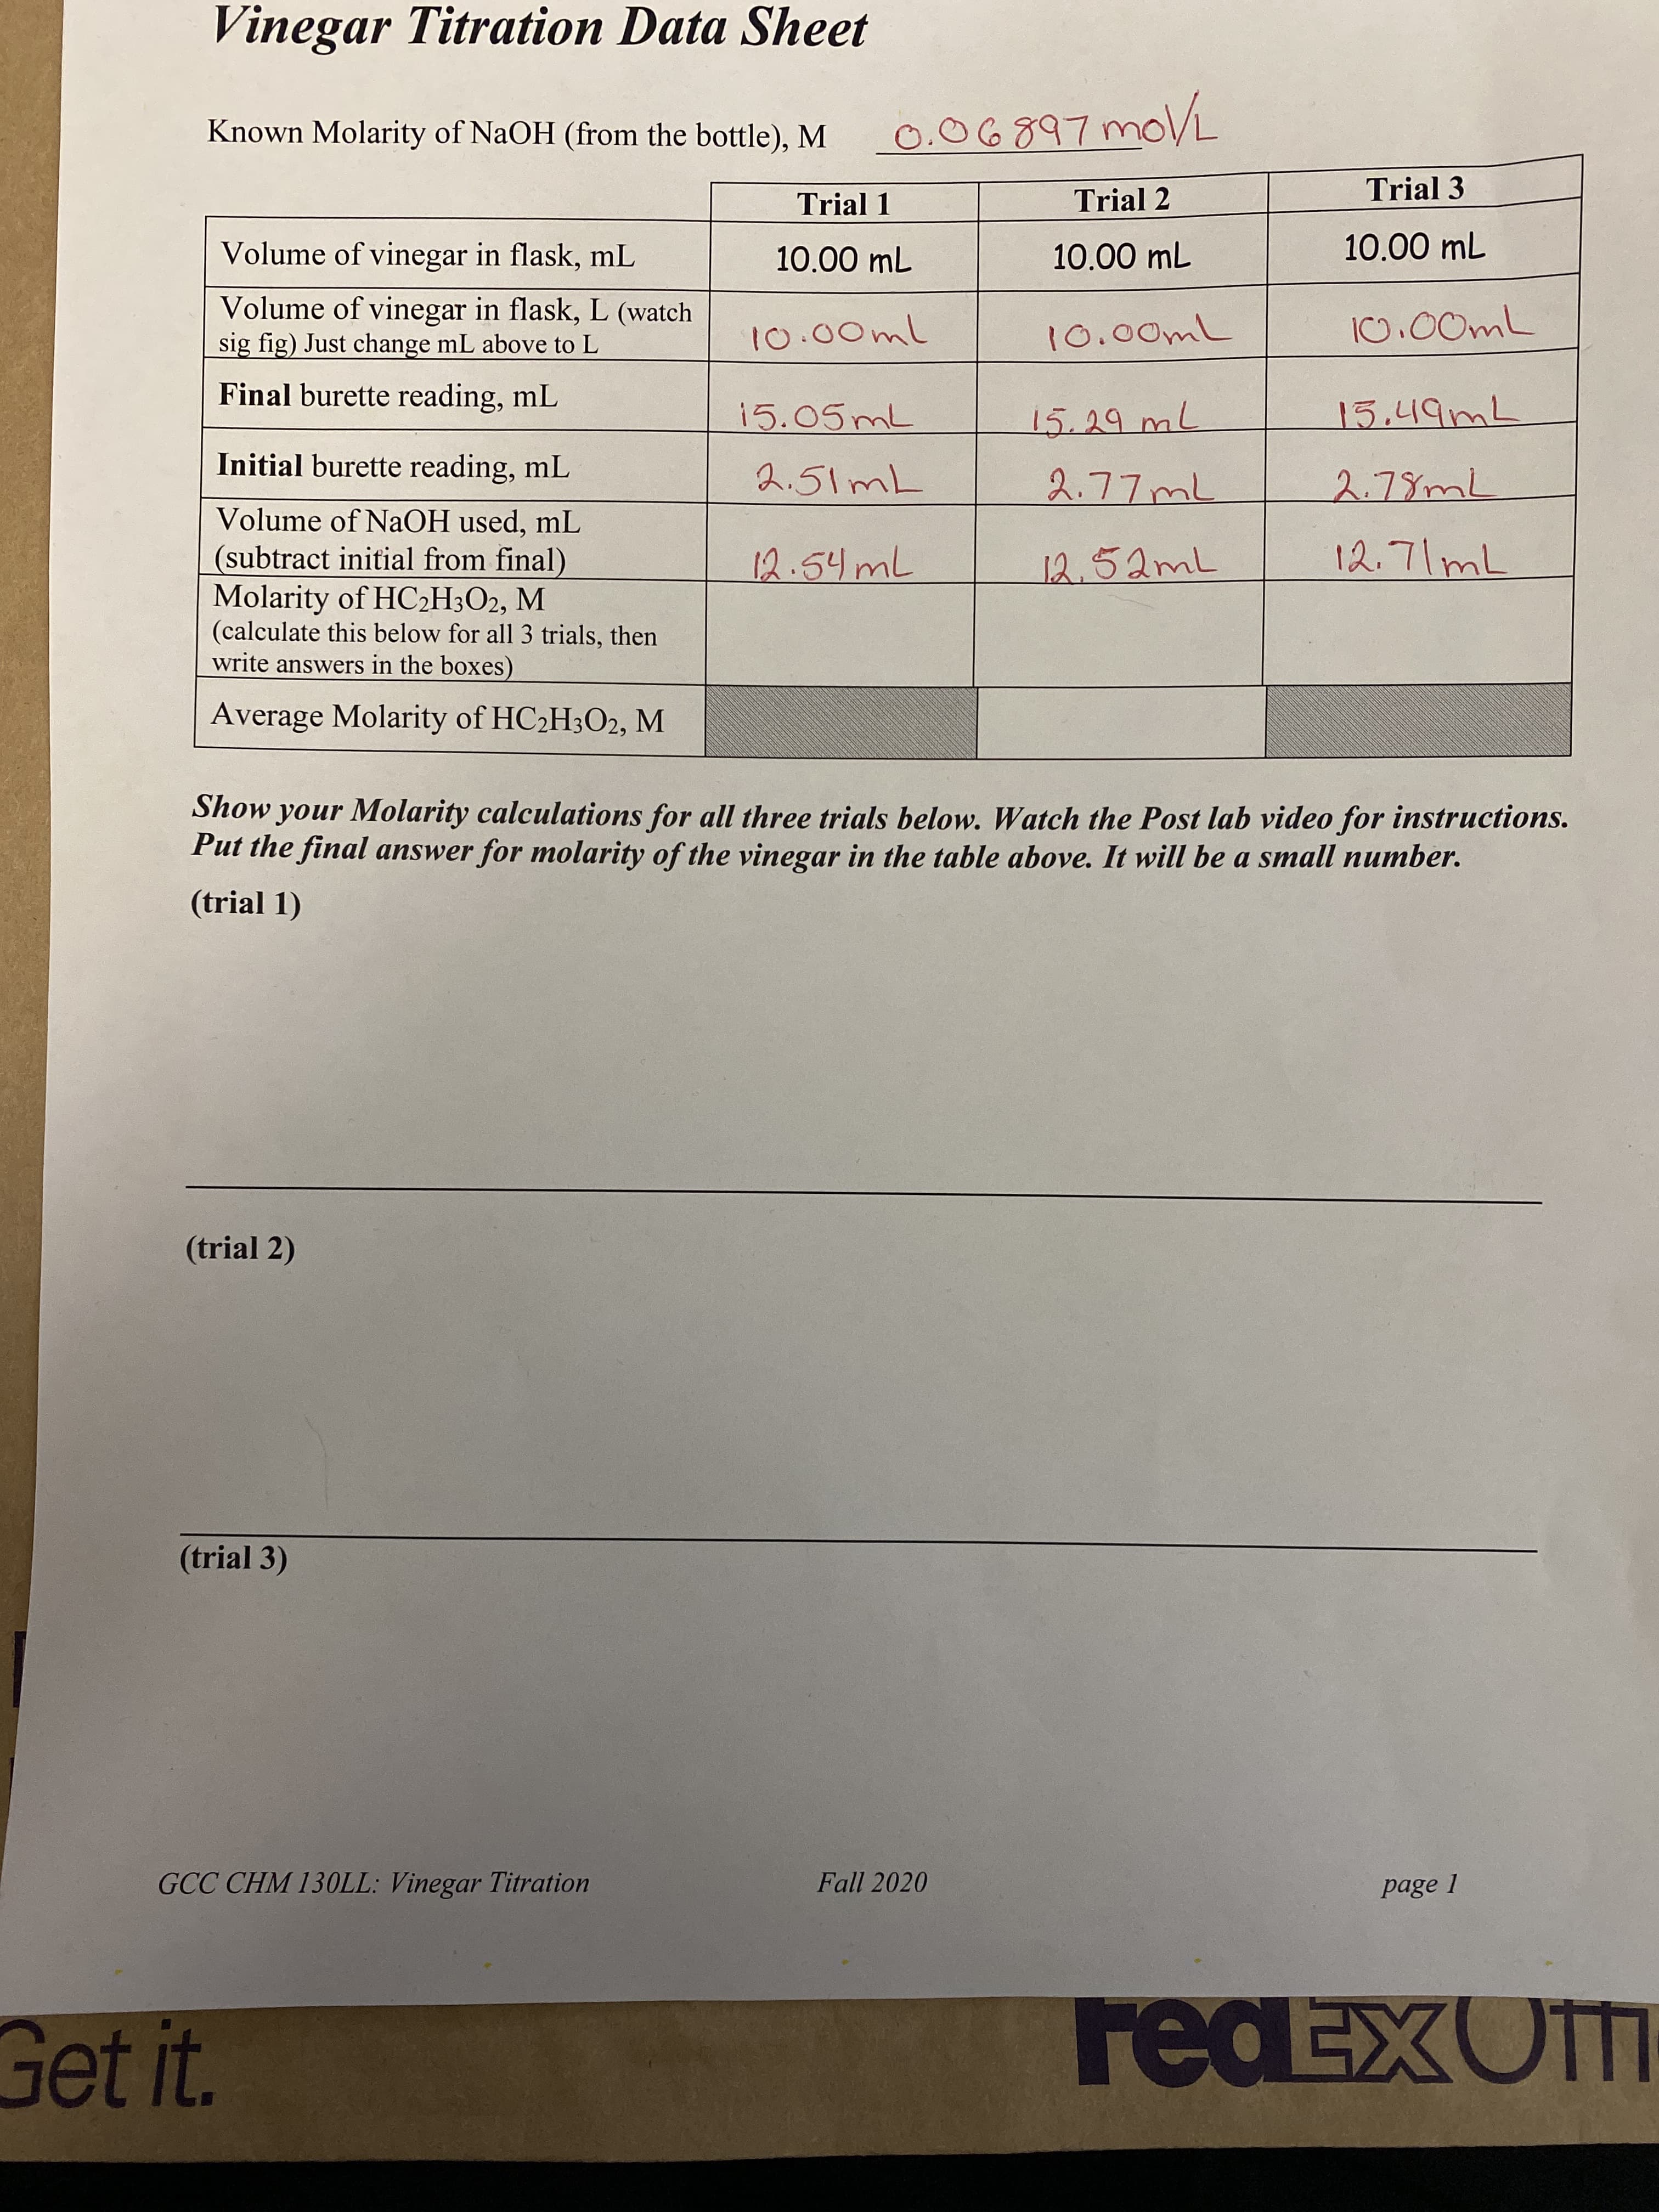 Vinegar Titration Data Sheet
Known Molarity of NaOH (from the bottle), M
0.06897moVL
Trial 1
Trial 2
Trial 3
Volume of vinegar in flask, mL
10.00 mL
10.00 mL
10.00 mL
Volume of vinegar in flask, L (watch
sig fig) Just change mL above to L
10,00mL
500ml
Final burette reading, mL
15.05ML
15.29mL
15,49ML
Initial burette reading, mL
2.51ML
Volume of NaOH used, mL
(subtract initial from final)
Molarity of HC2H3O2, M
(calculate this below for all 3 trials, then
write answers in the boxes)
12.54ML
12.52mL
12.71mL
Average Molarity of HC2H3O2, M
Show your Molarity calculations for all three trials below. Watch the Post lab video for instructions.
Put the final answer for molarity of the vinegar in the table above. It will be a small number.
(trial 1)
(trial 2)
(trial 3)
GCC CHM 13OLL: Vinegar Titration
Fall 2020
page 1
Get it.
